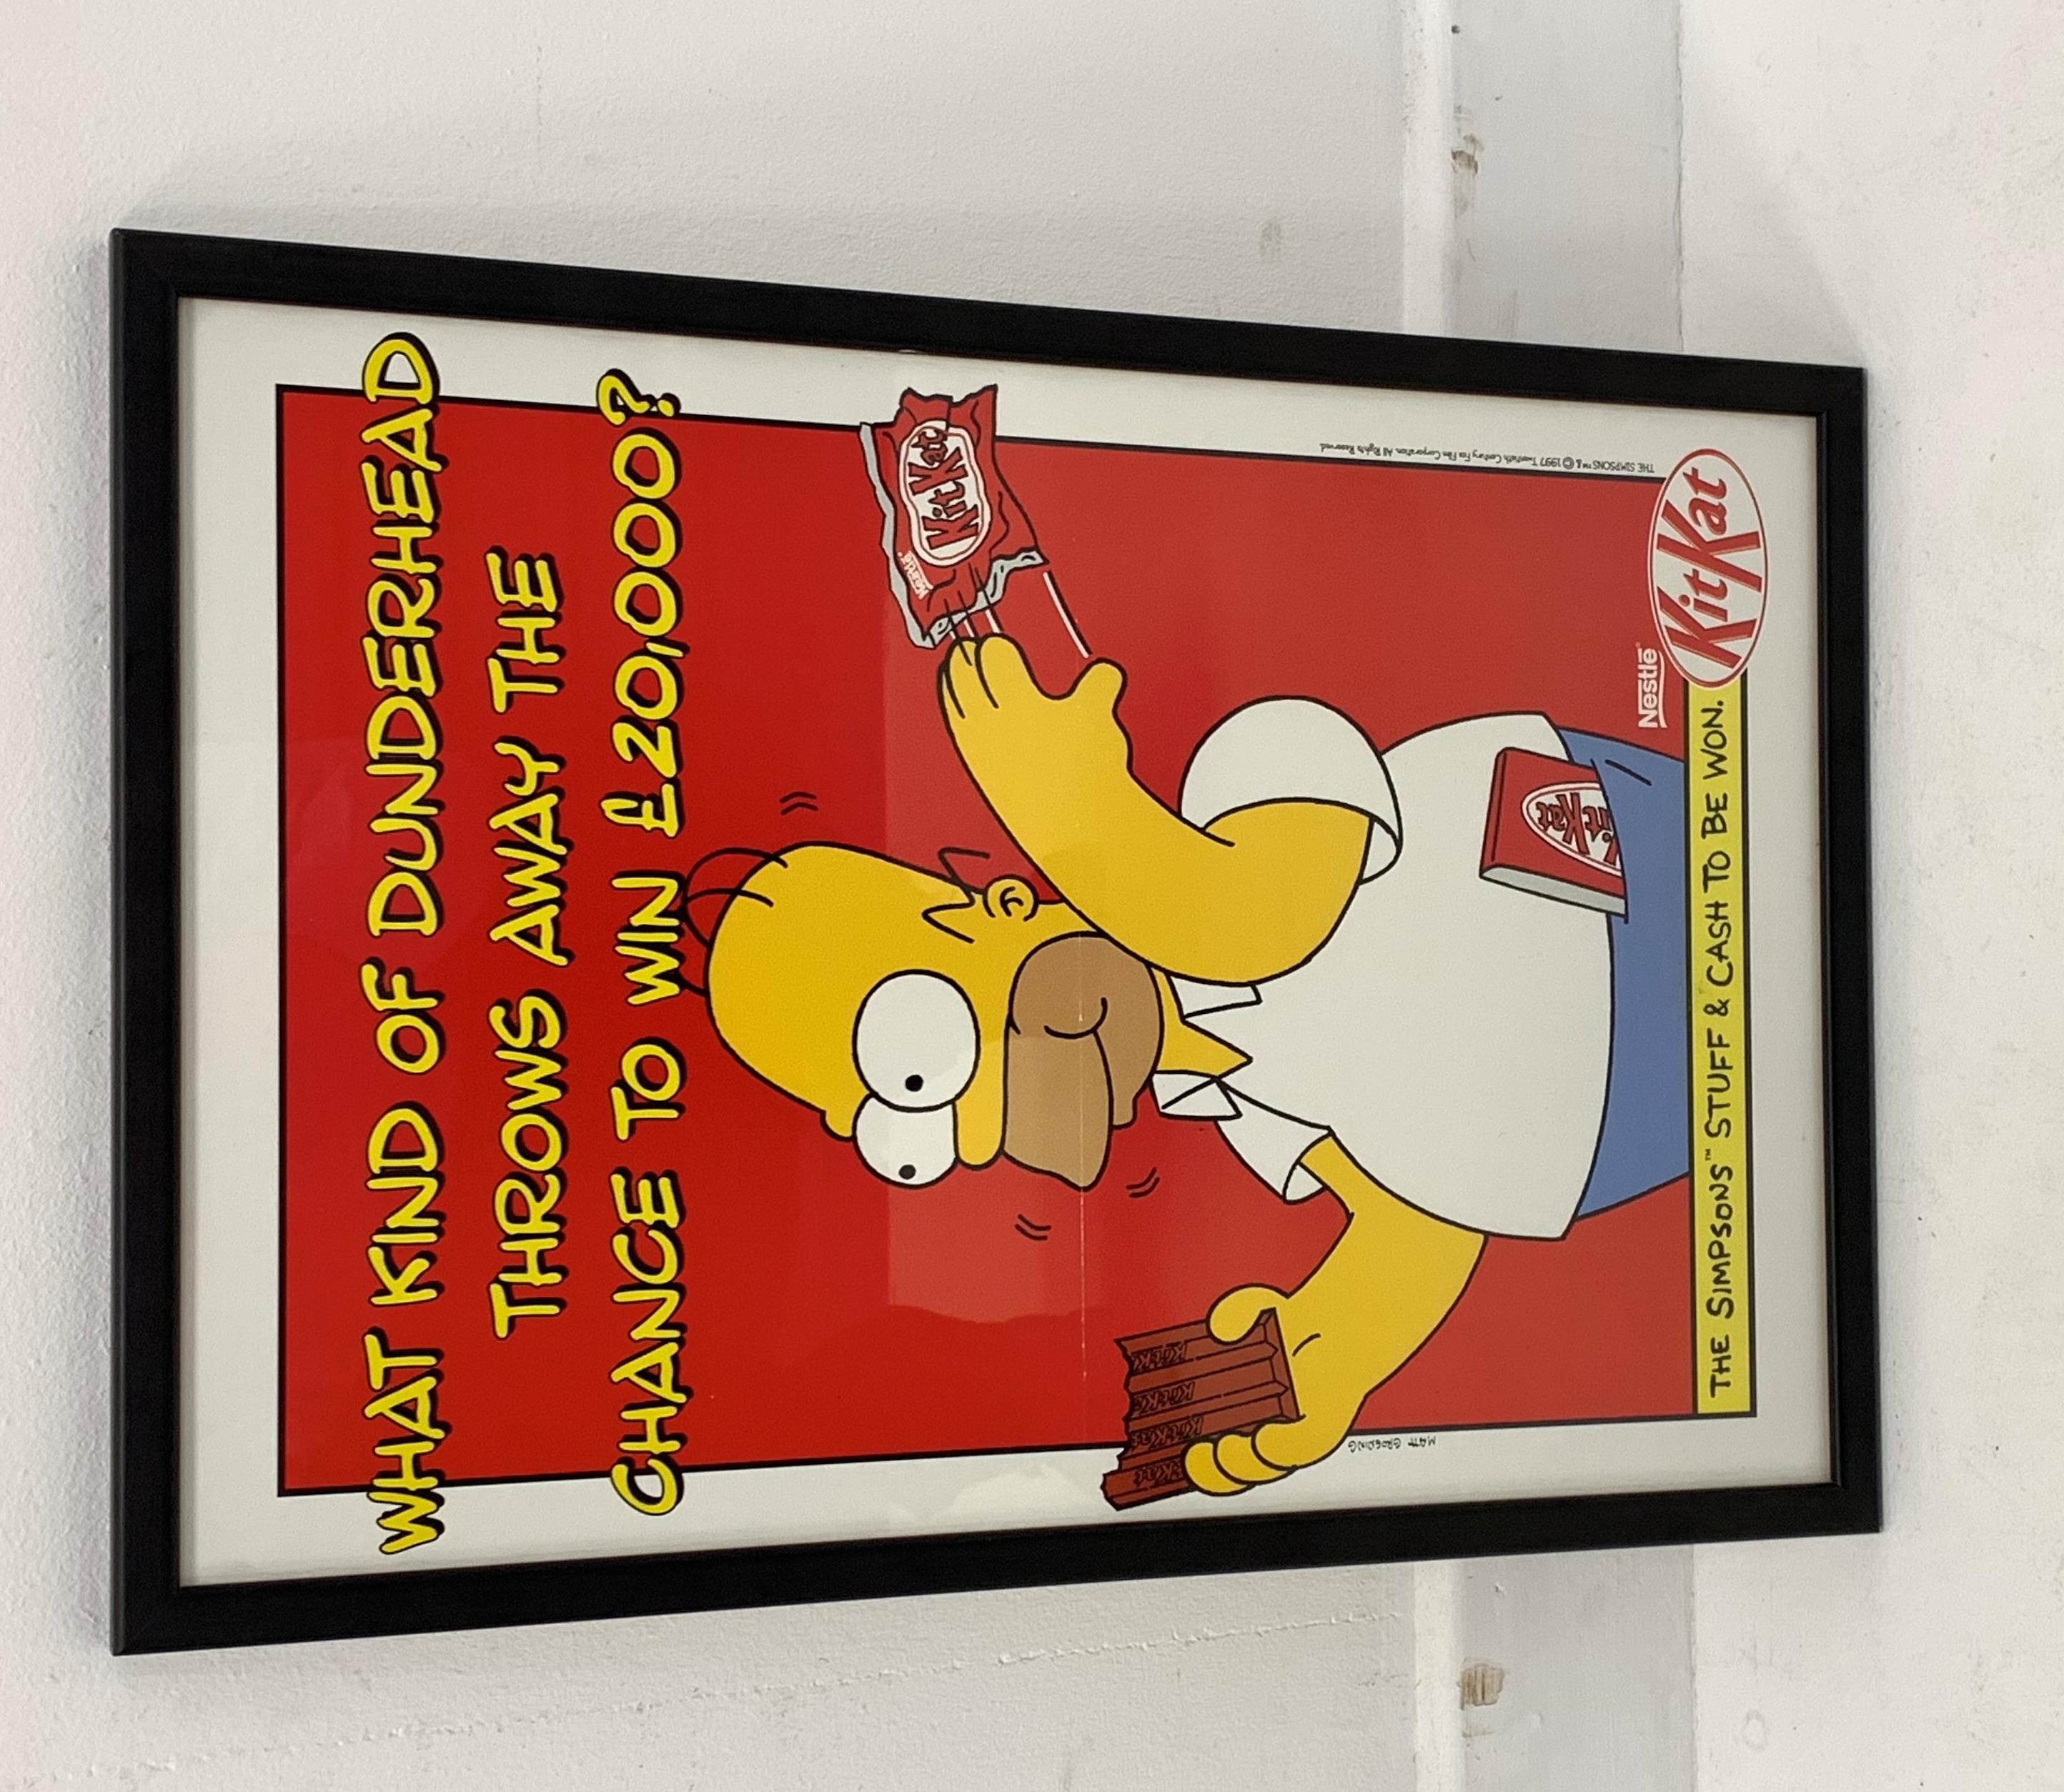 The Simpsons advertising print for Nestle, 39cm x 26cm - Image 2 of 2